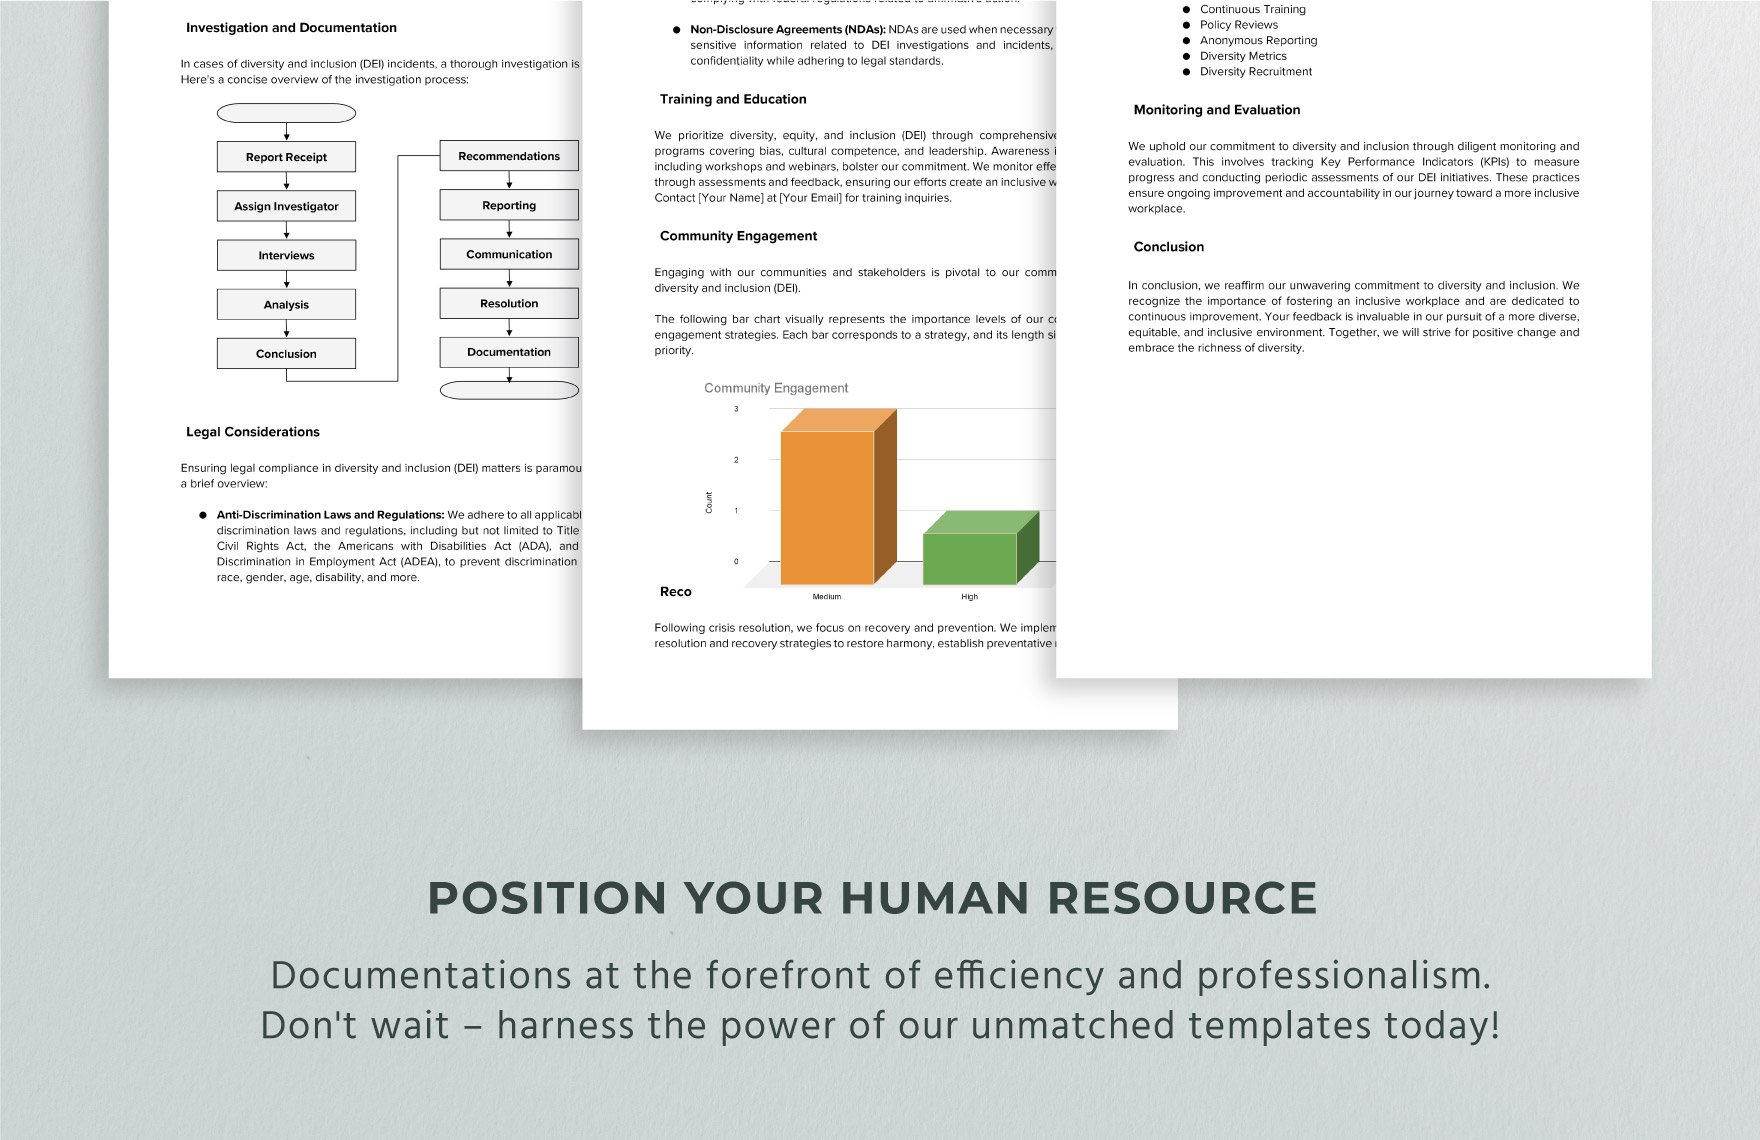 Diversity and Inclusion Crisis Management and Response Manual HR Template